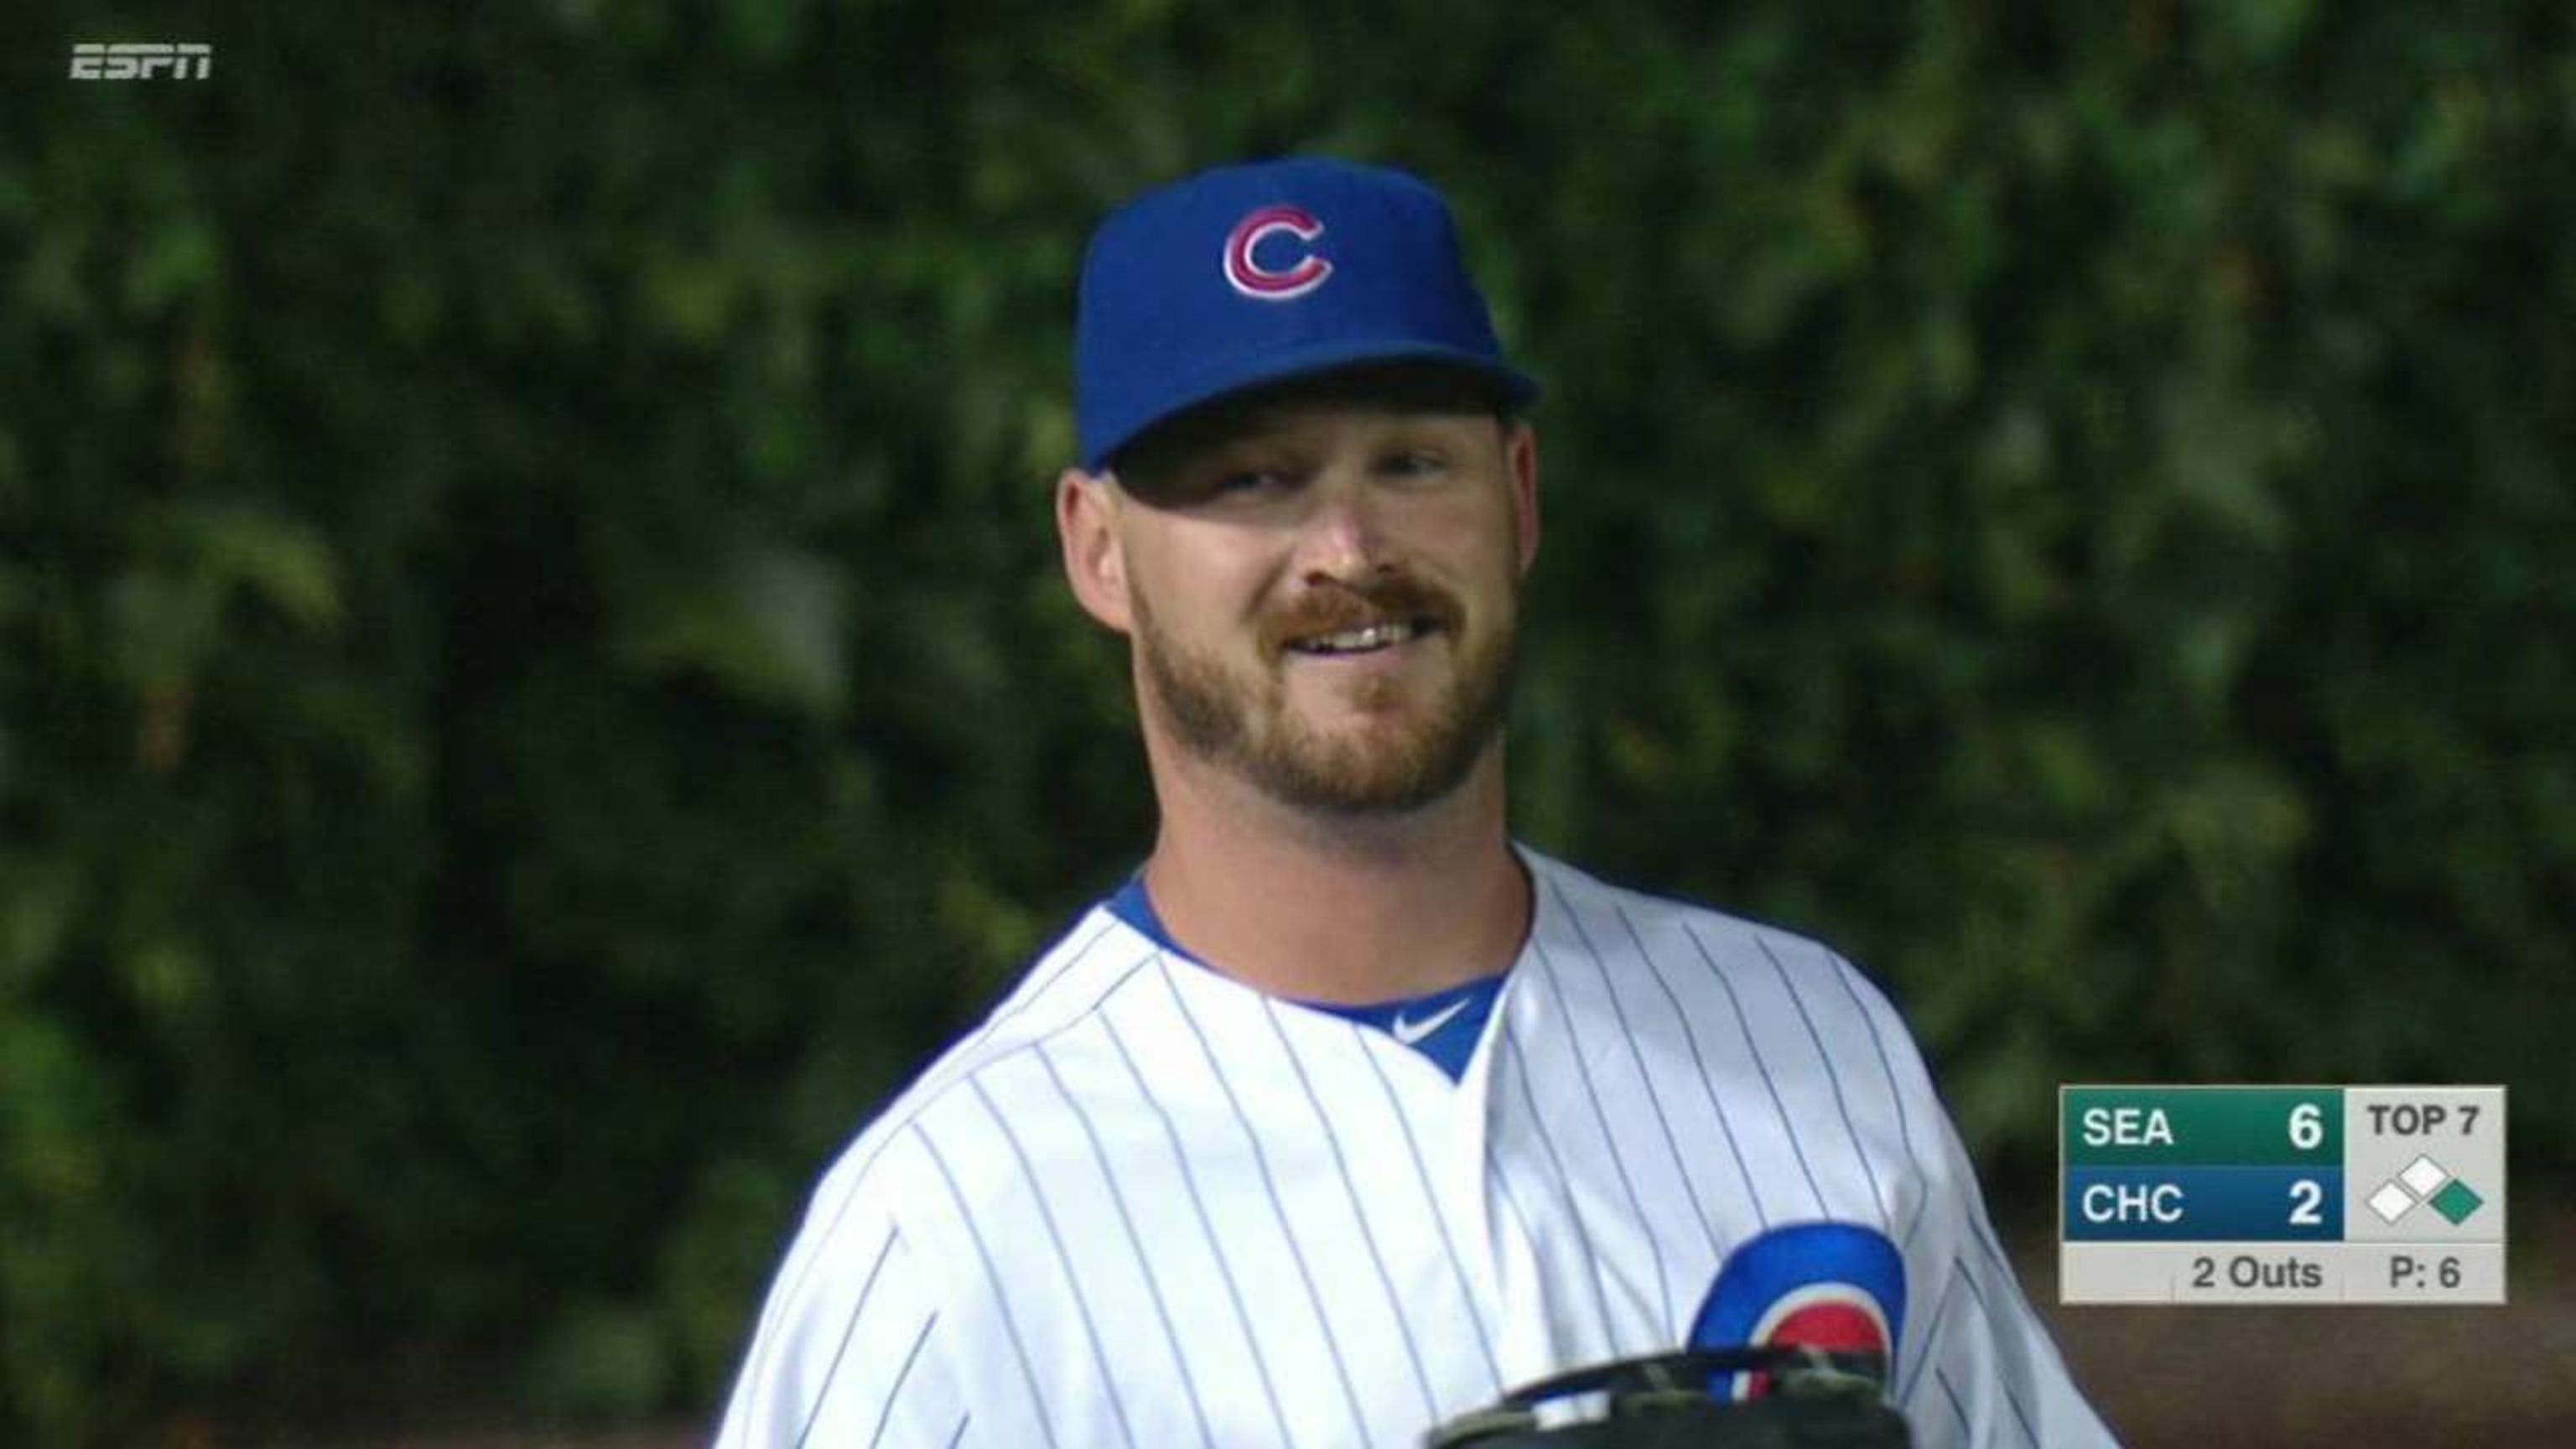 Cubs reliever Travis Wood makes history with playoff home run